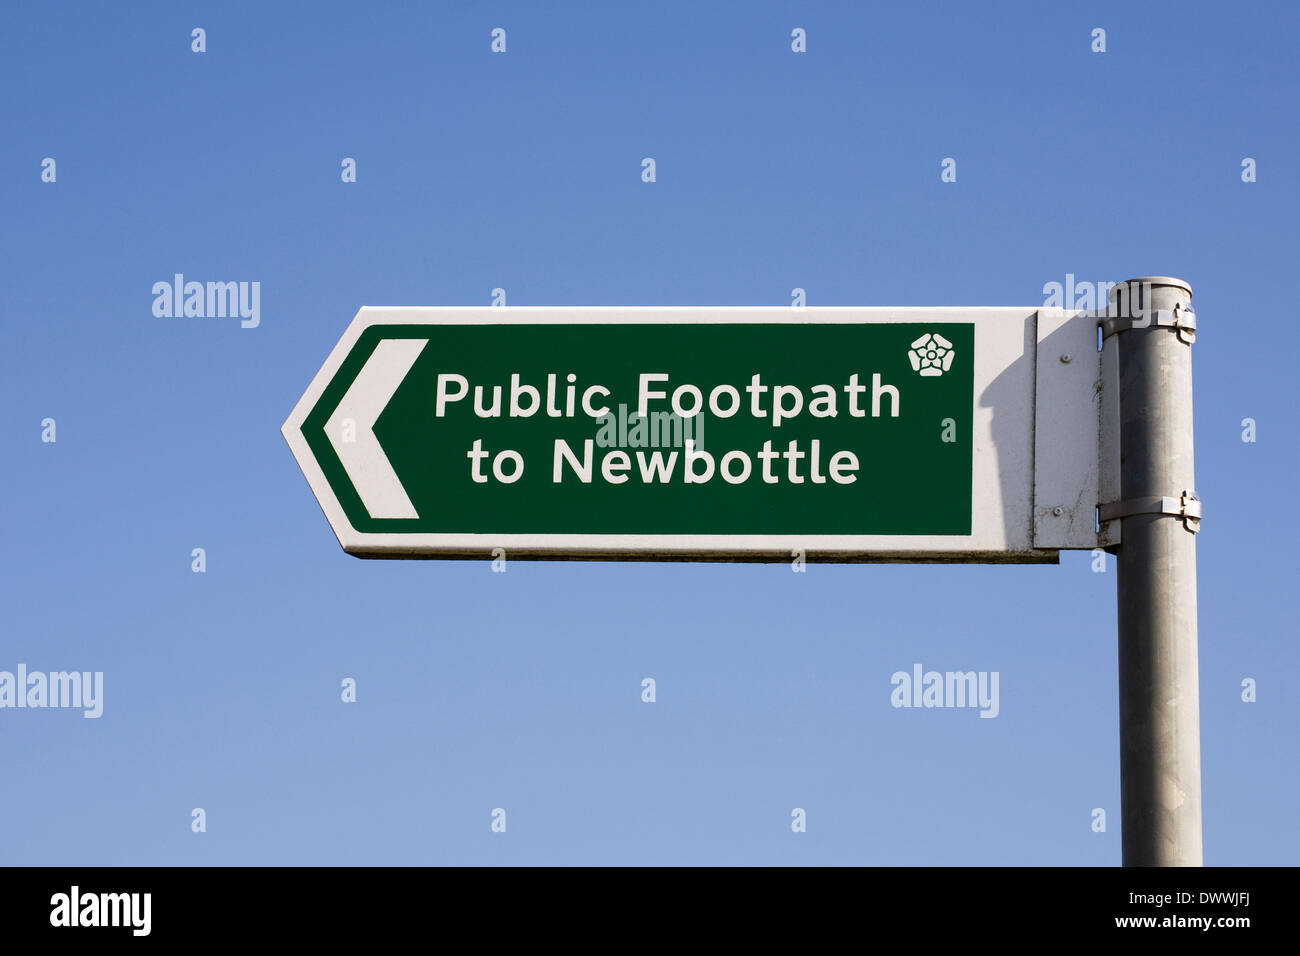 Public footpath signpost in the UK. Stock Photo